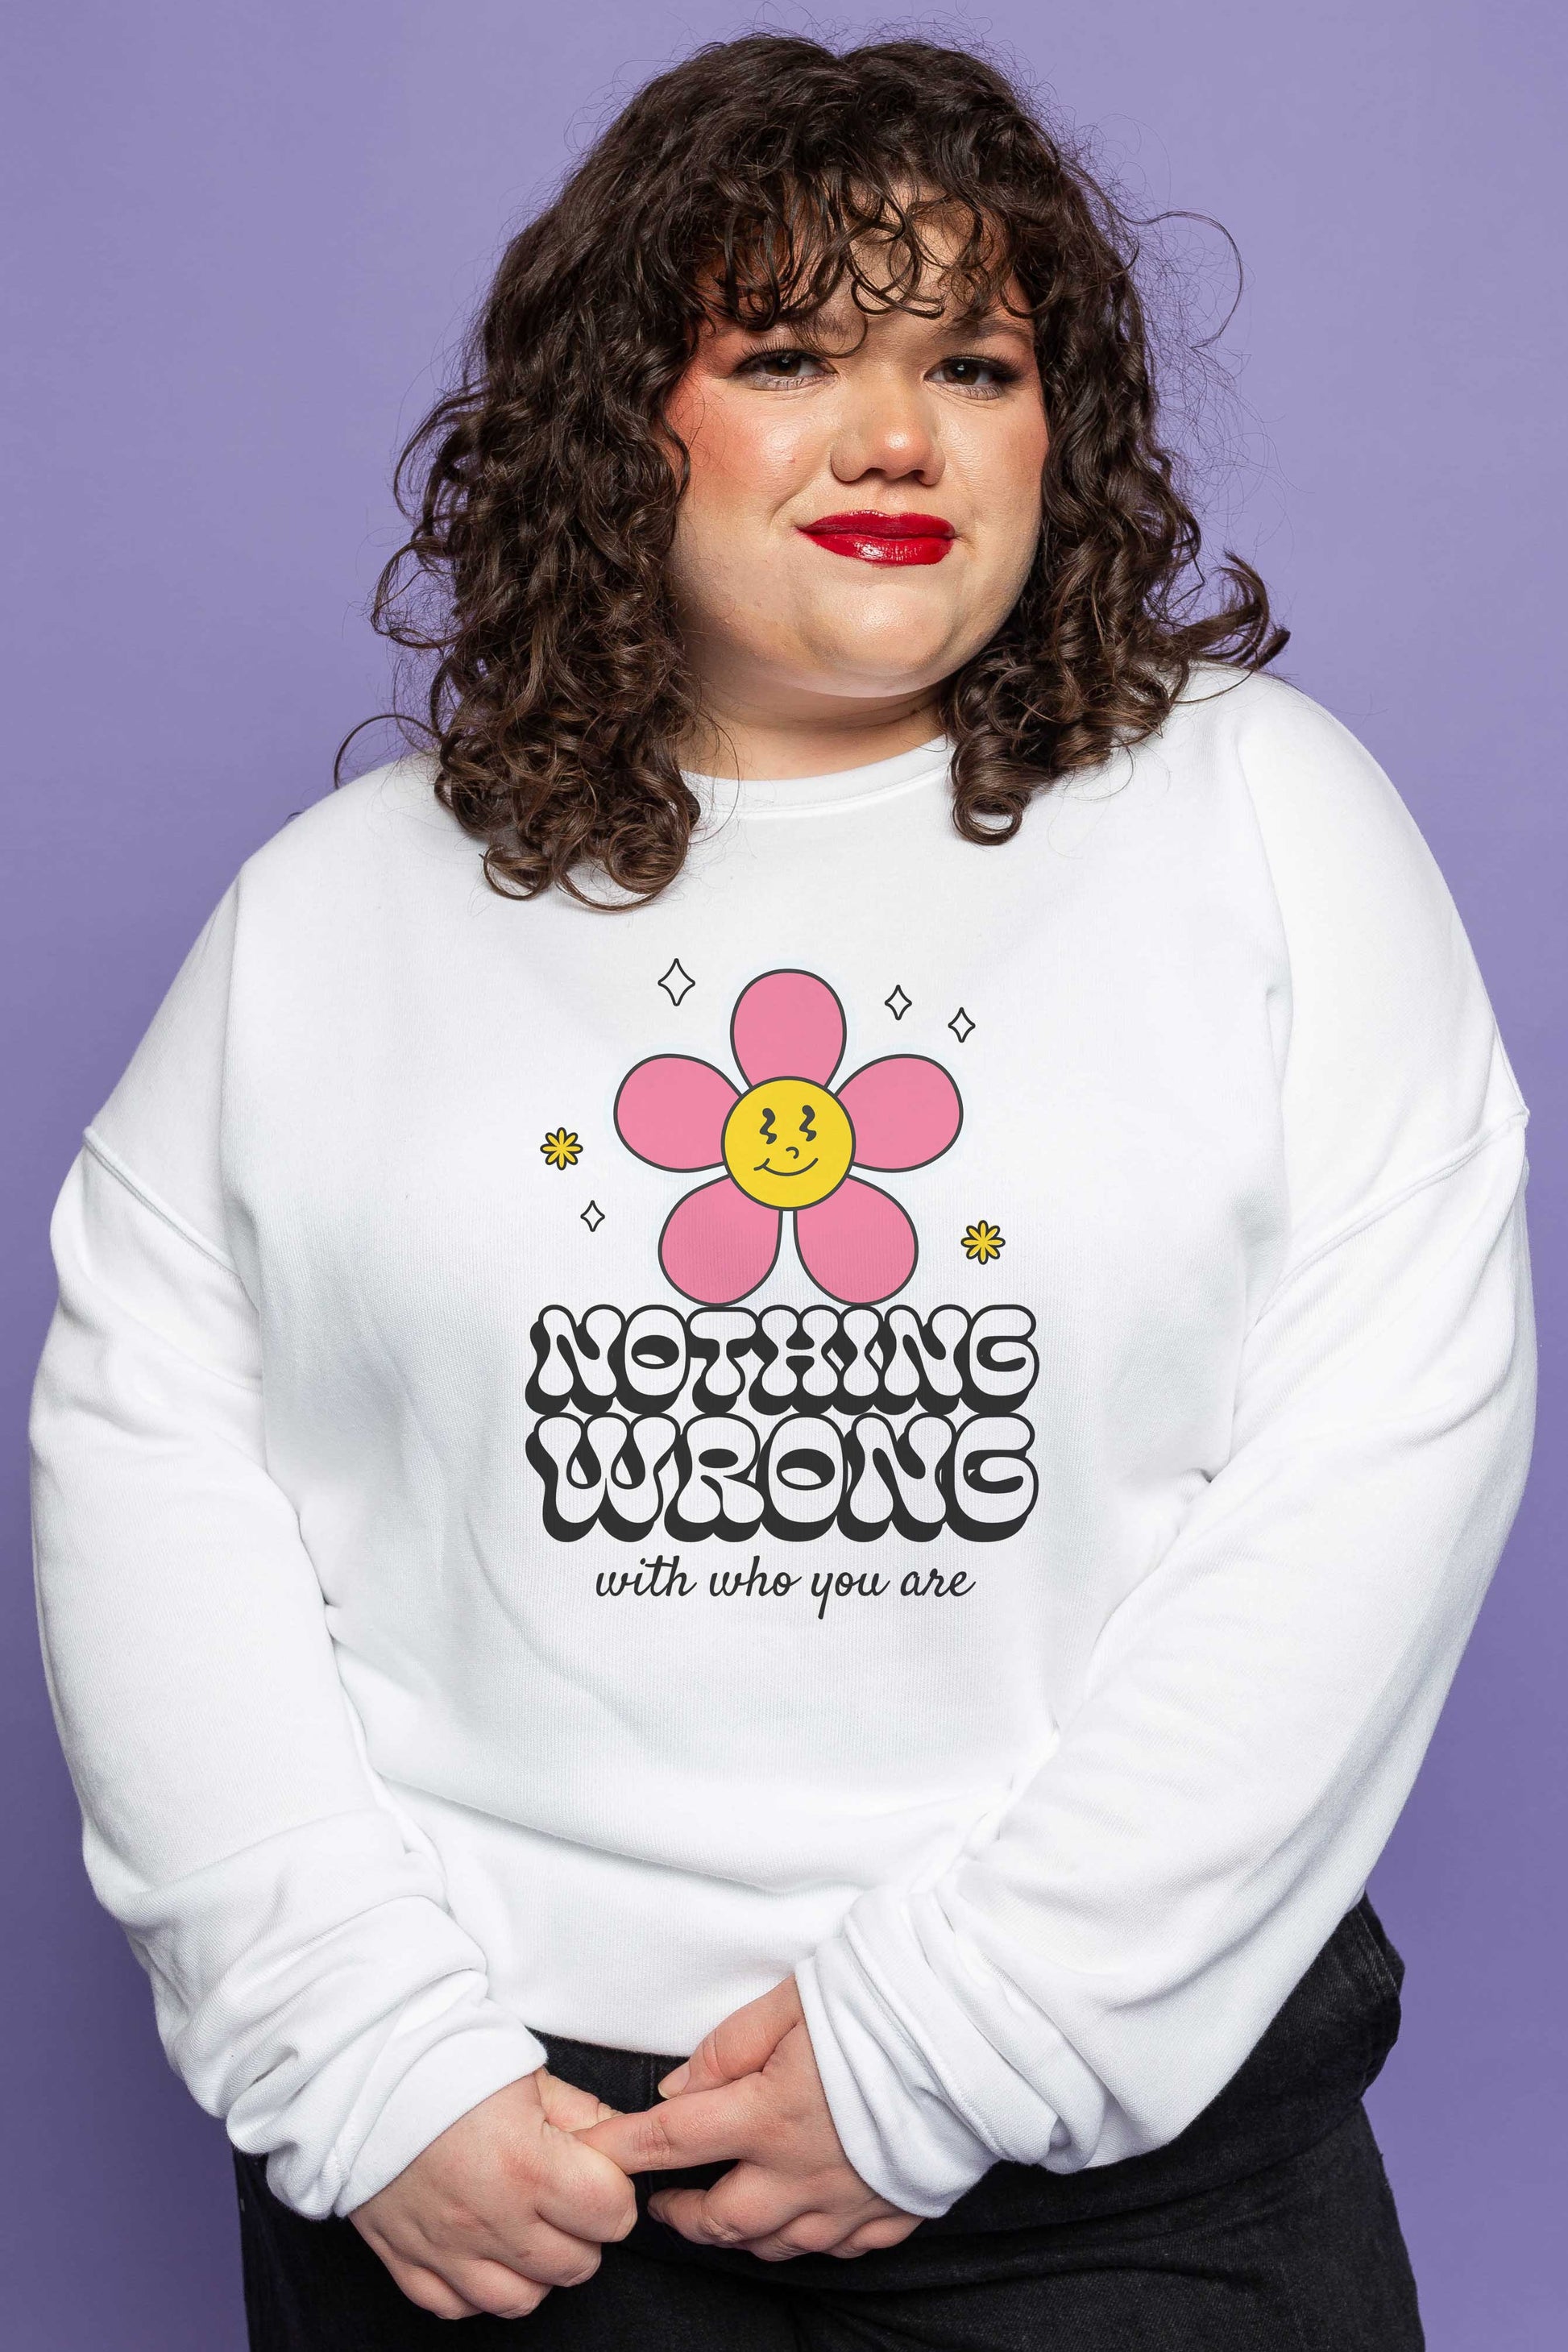 This is The Remix Sweatshirt NOTHING WRONG WITH WHO YOU ARE - Unisex Sweatshirt in White